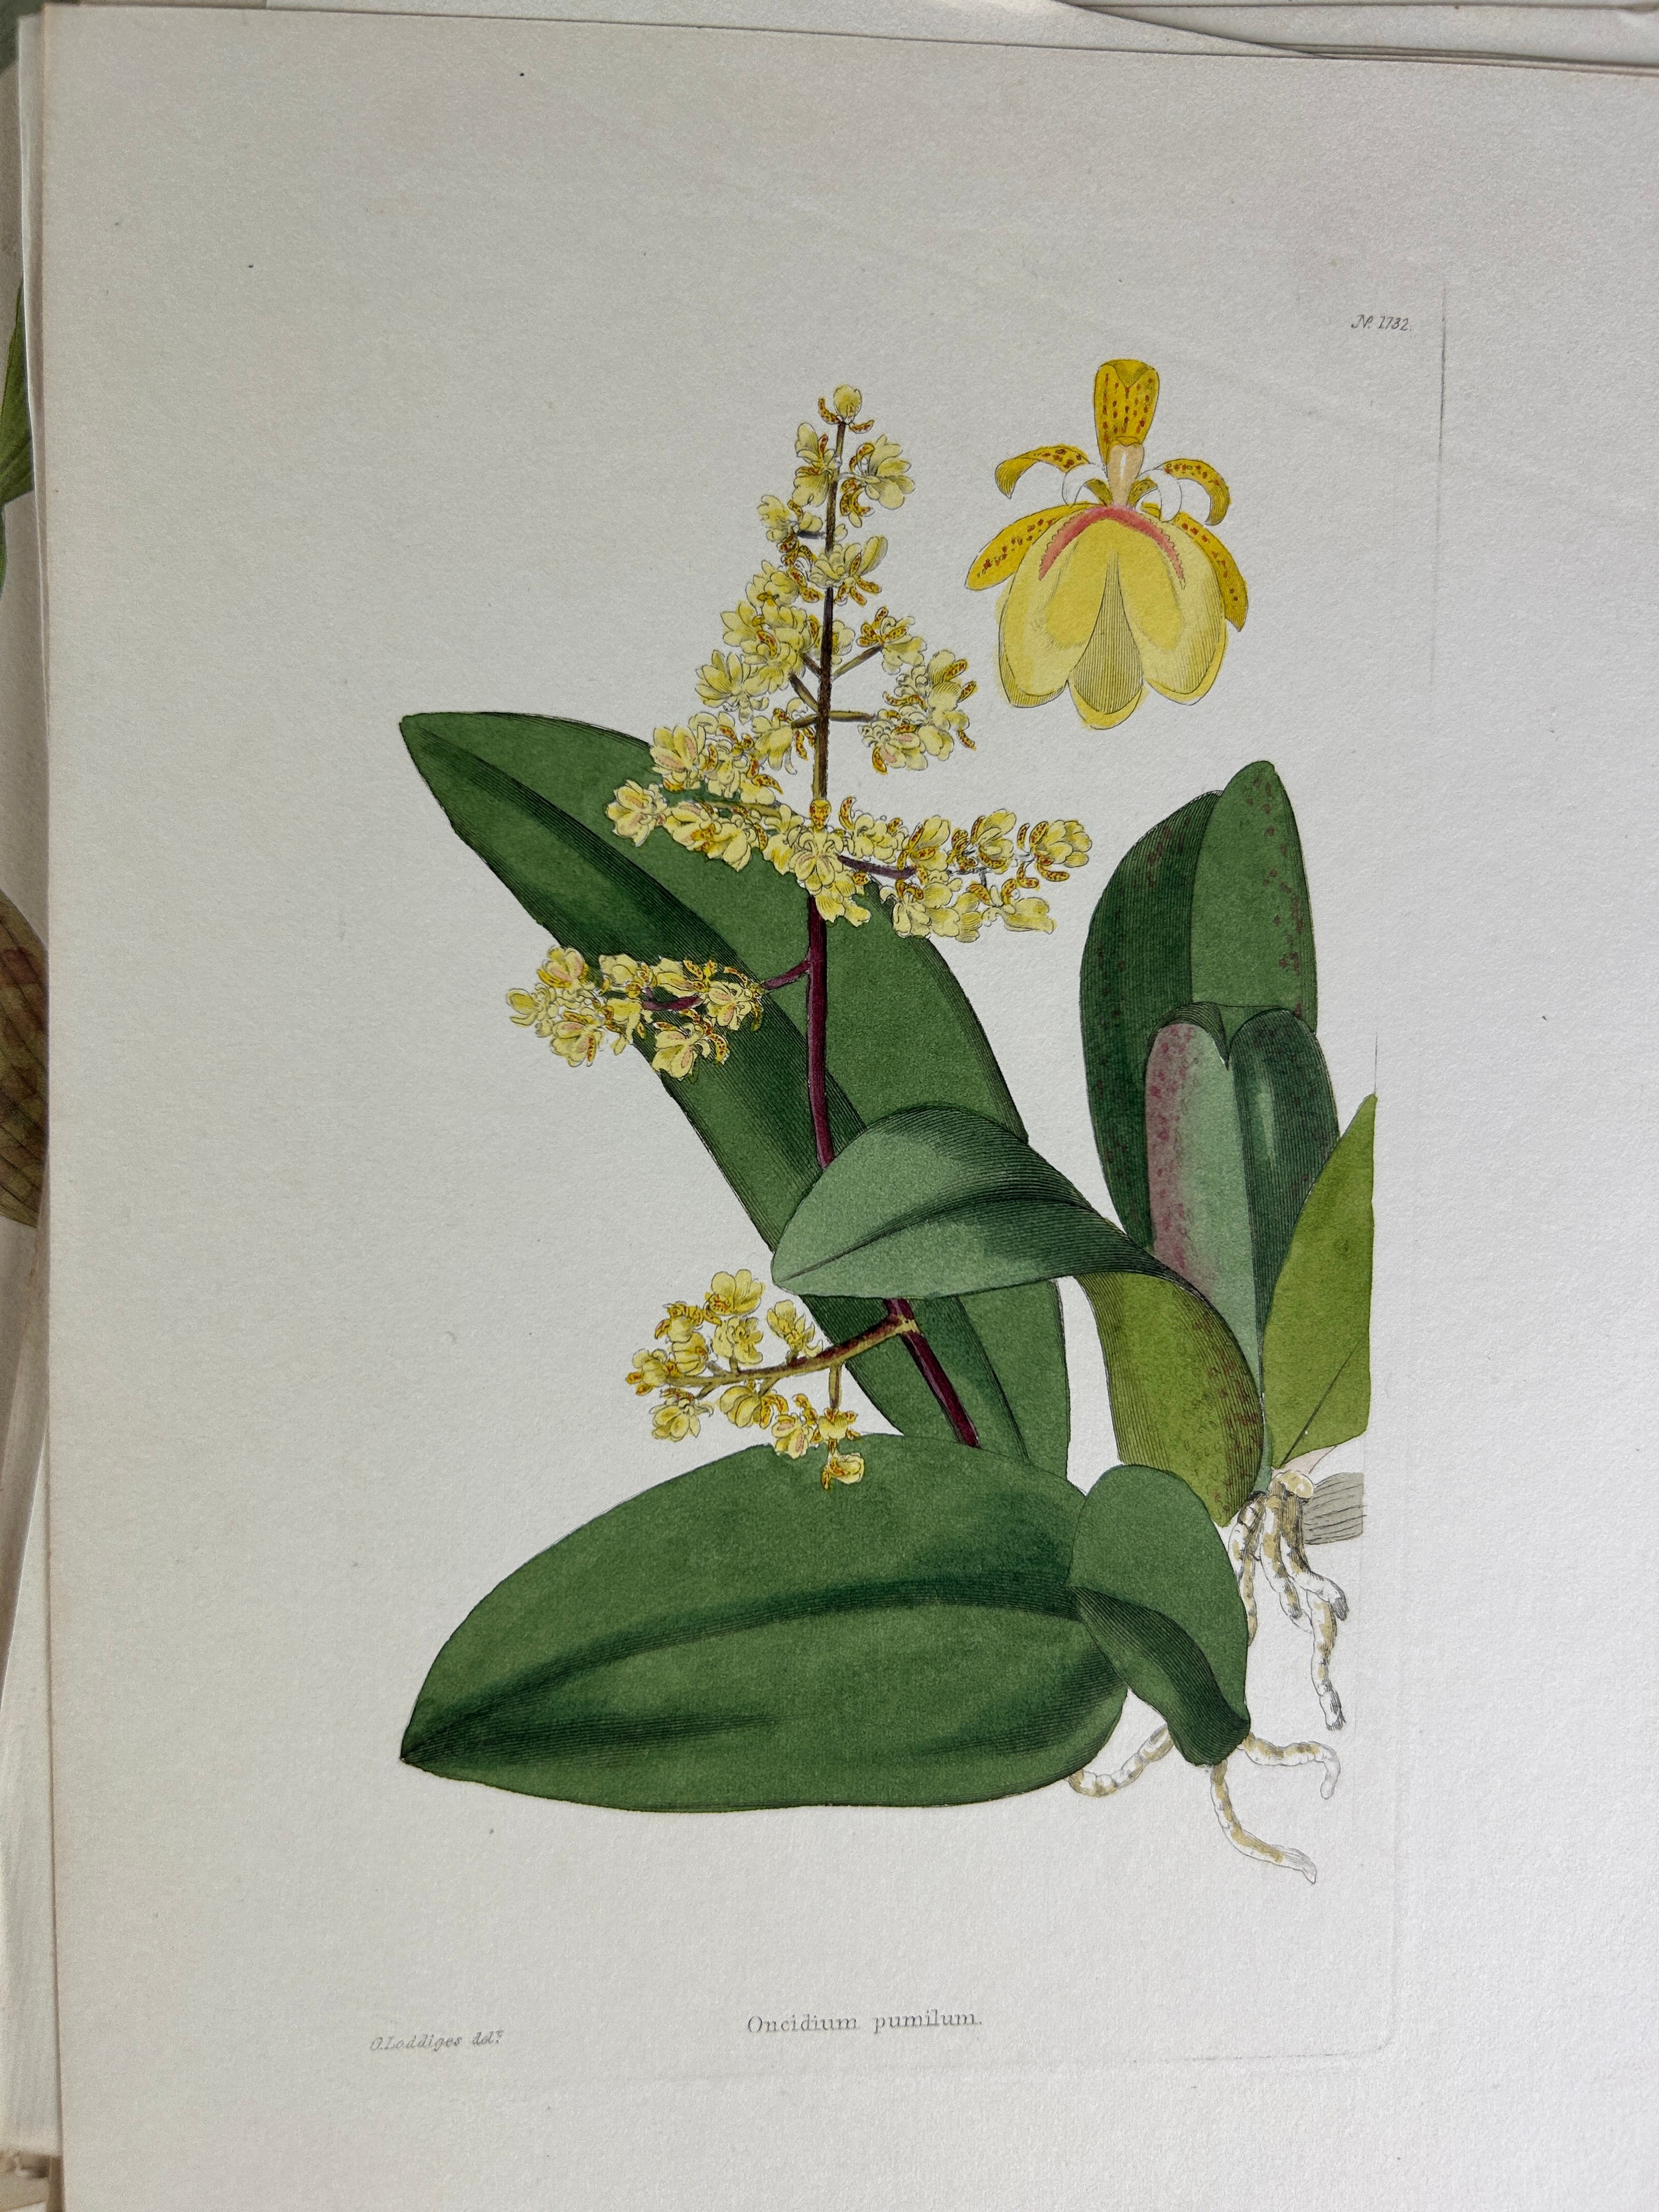 GEORGE LODDIGES (1786-1846) A LARGE COLLECTION OF BOTANICAL HAND COLOURED PLATES OF FLOWERS AND - Image 7 of 7